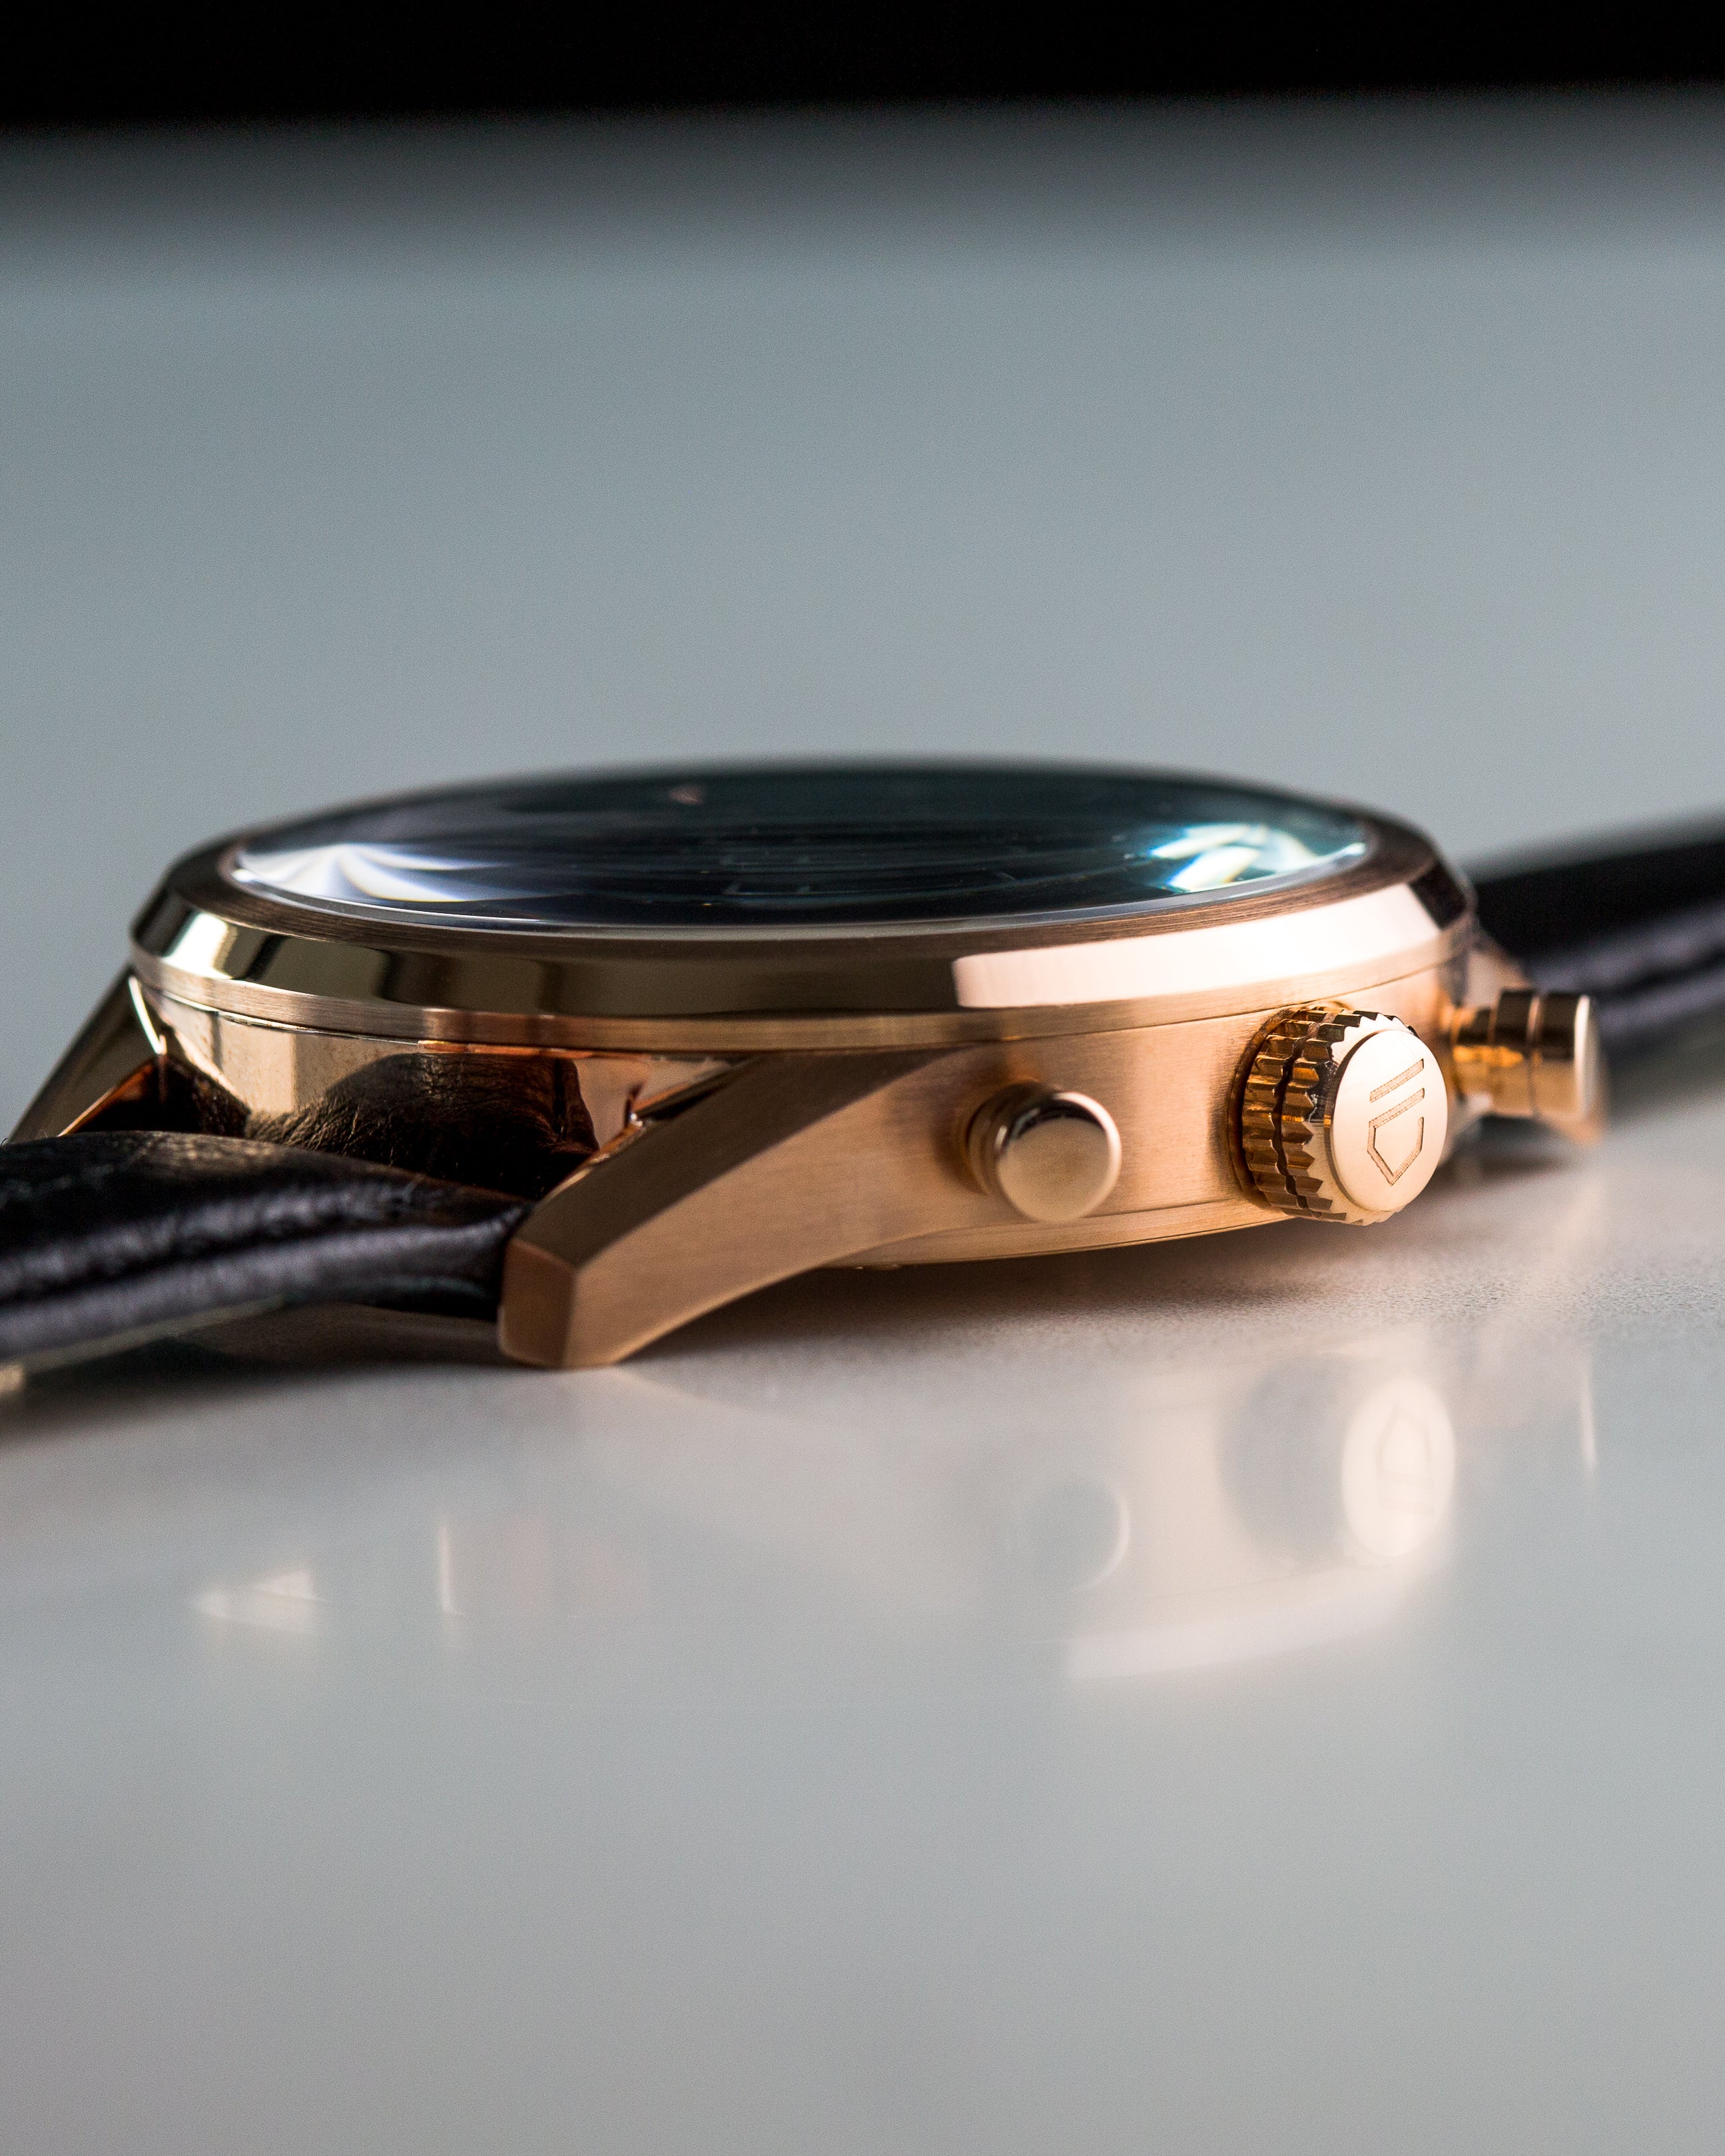 rose gold watch case showing crown with engraved logo